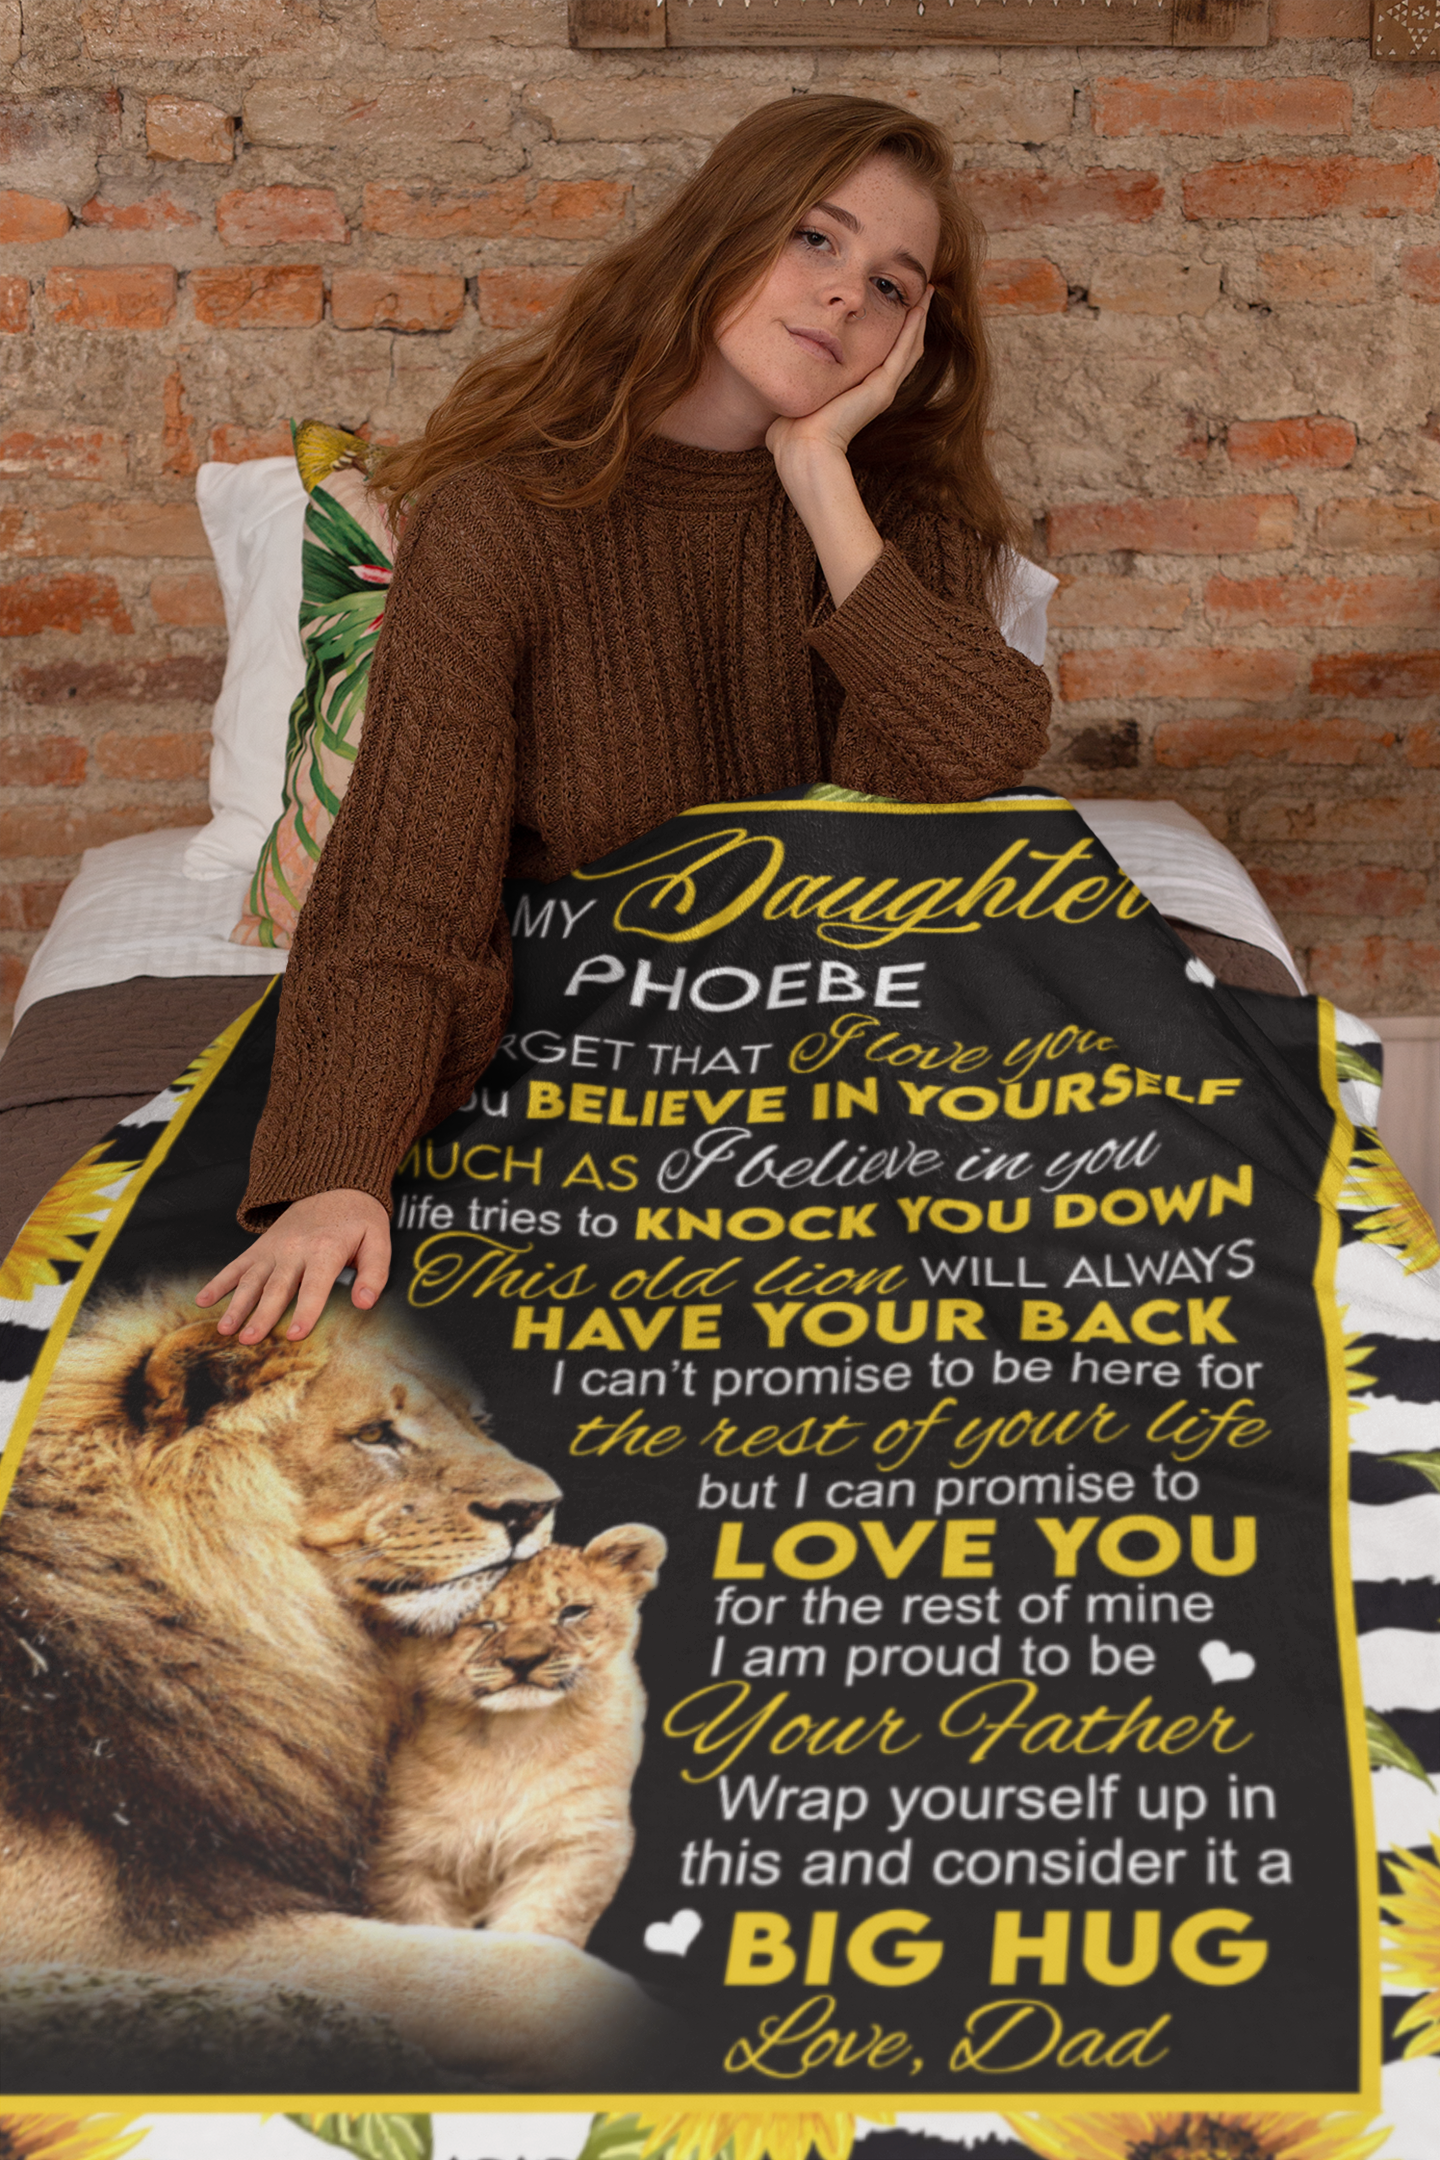 To My Daughter Lion & Sunflower Personalized Blanket From Dad